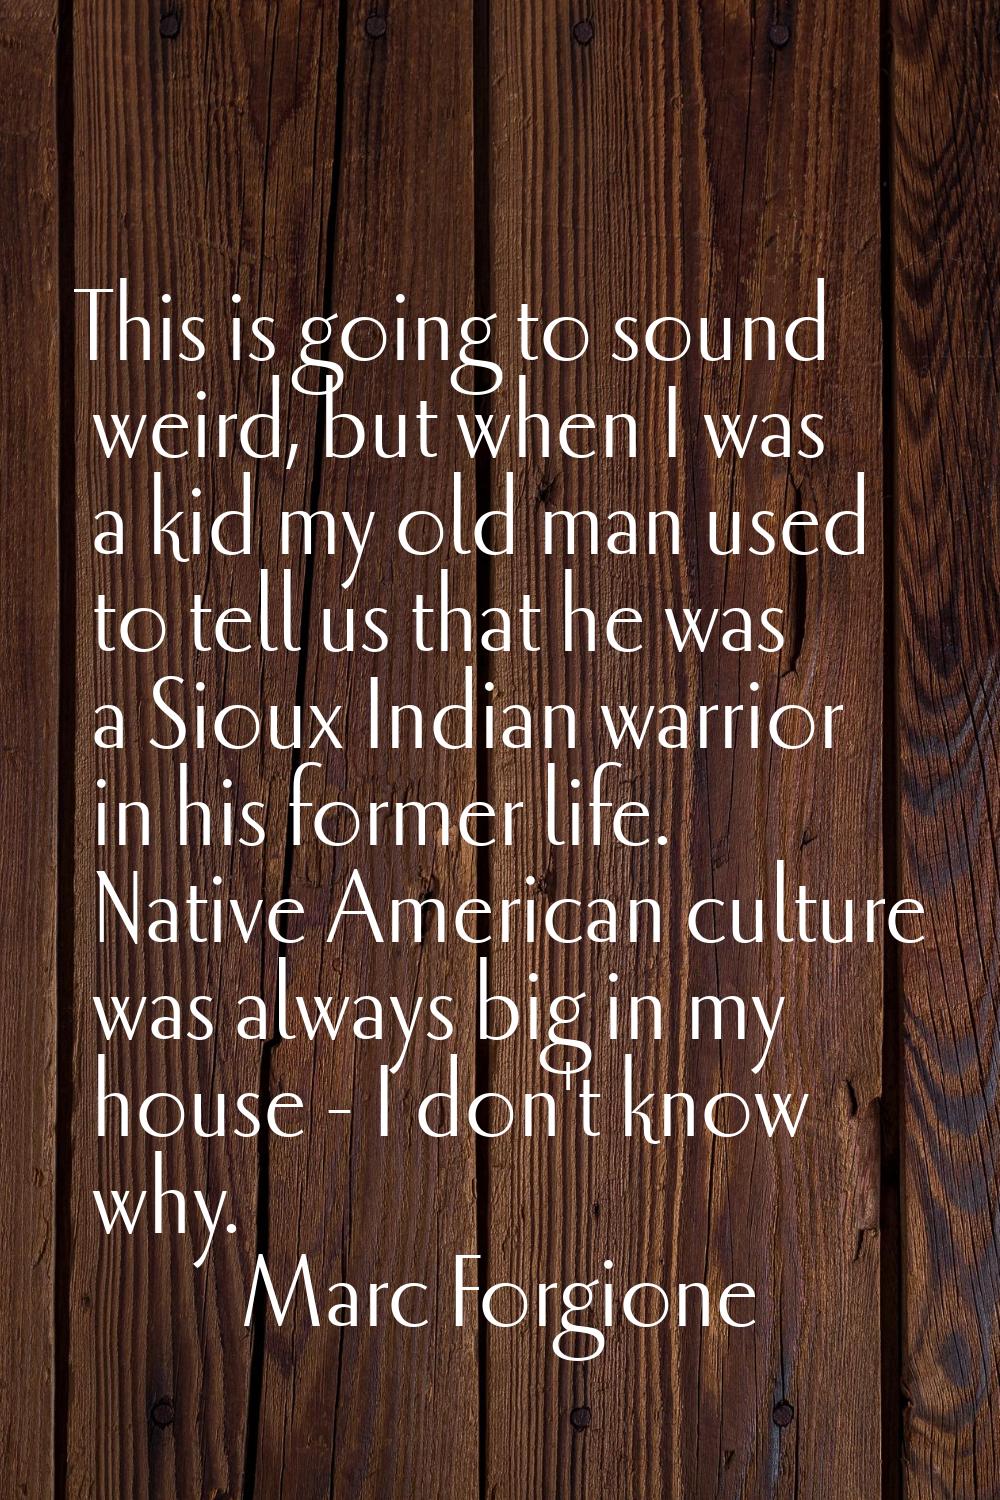 This is going to sound weird, but when I was a kid my old man used to tell us that he was a Sioux I